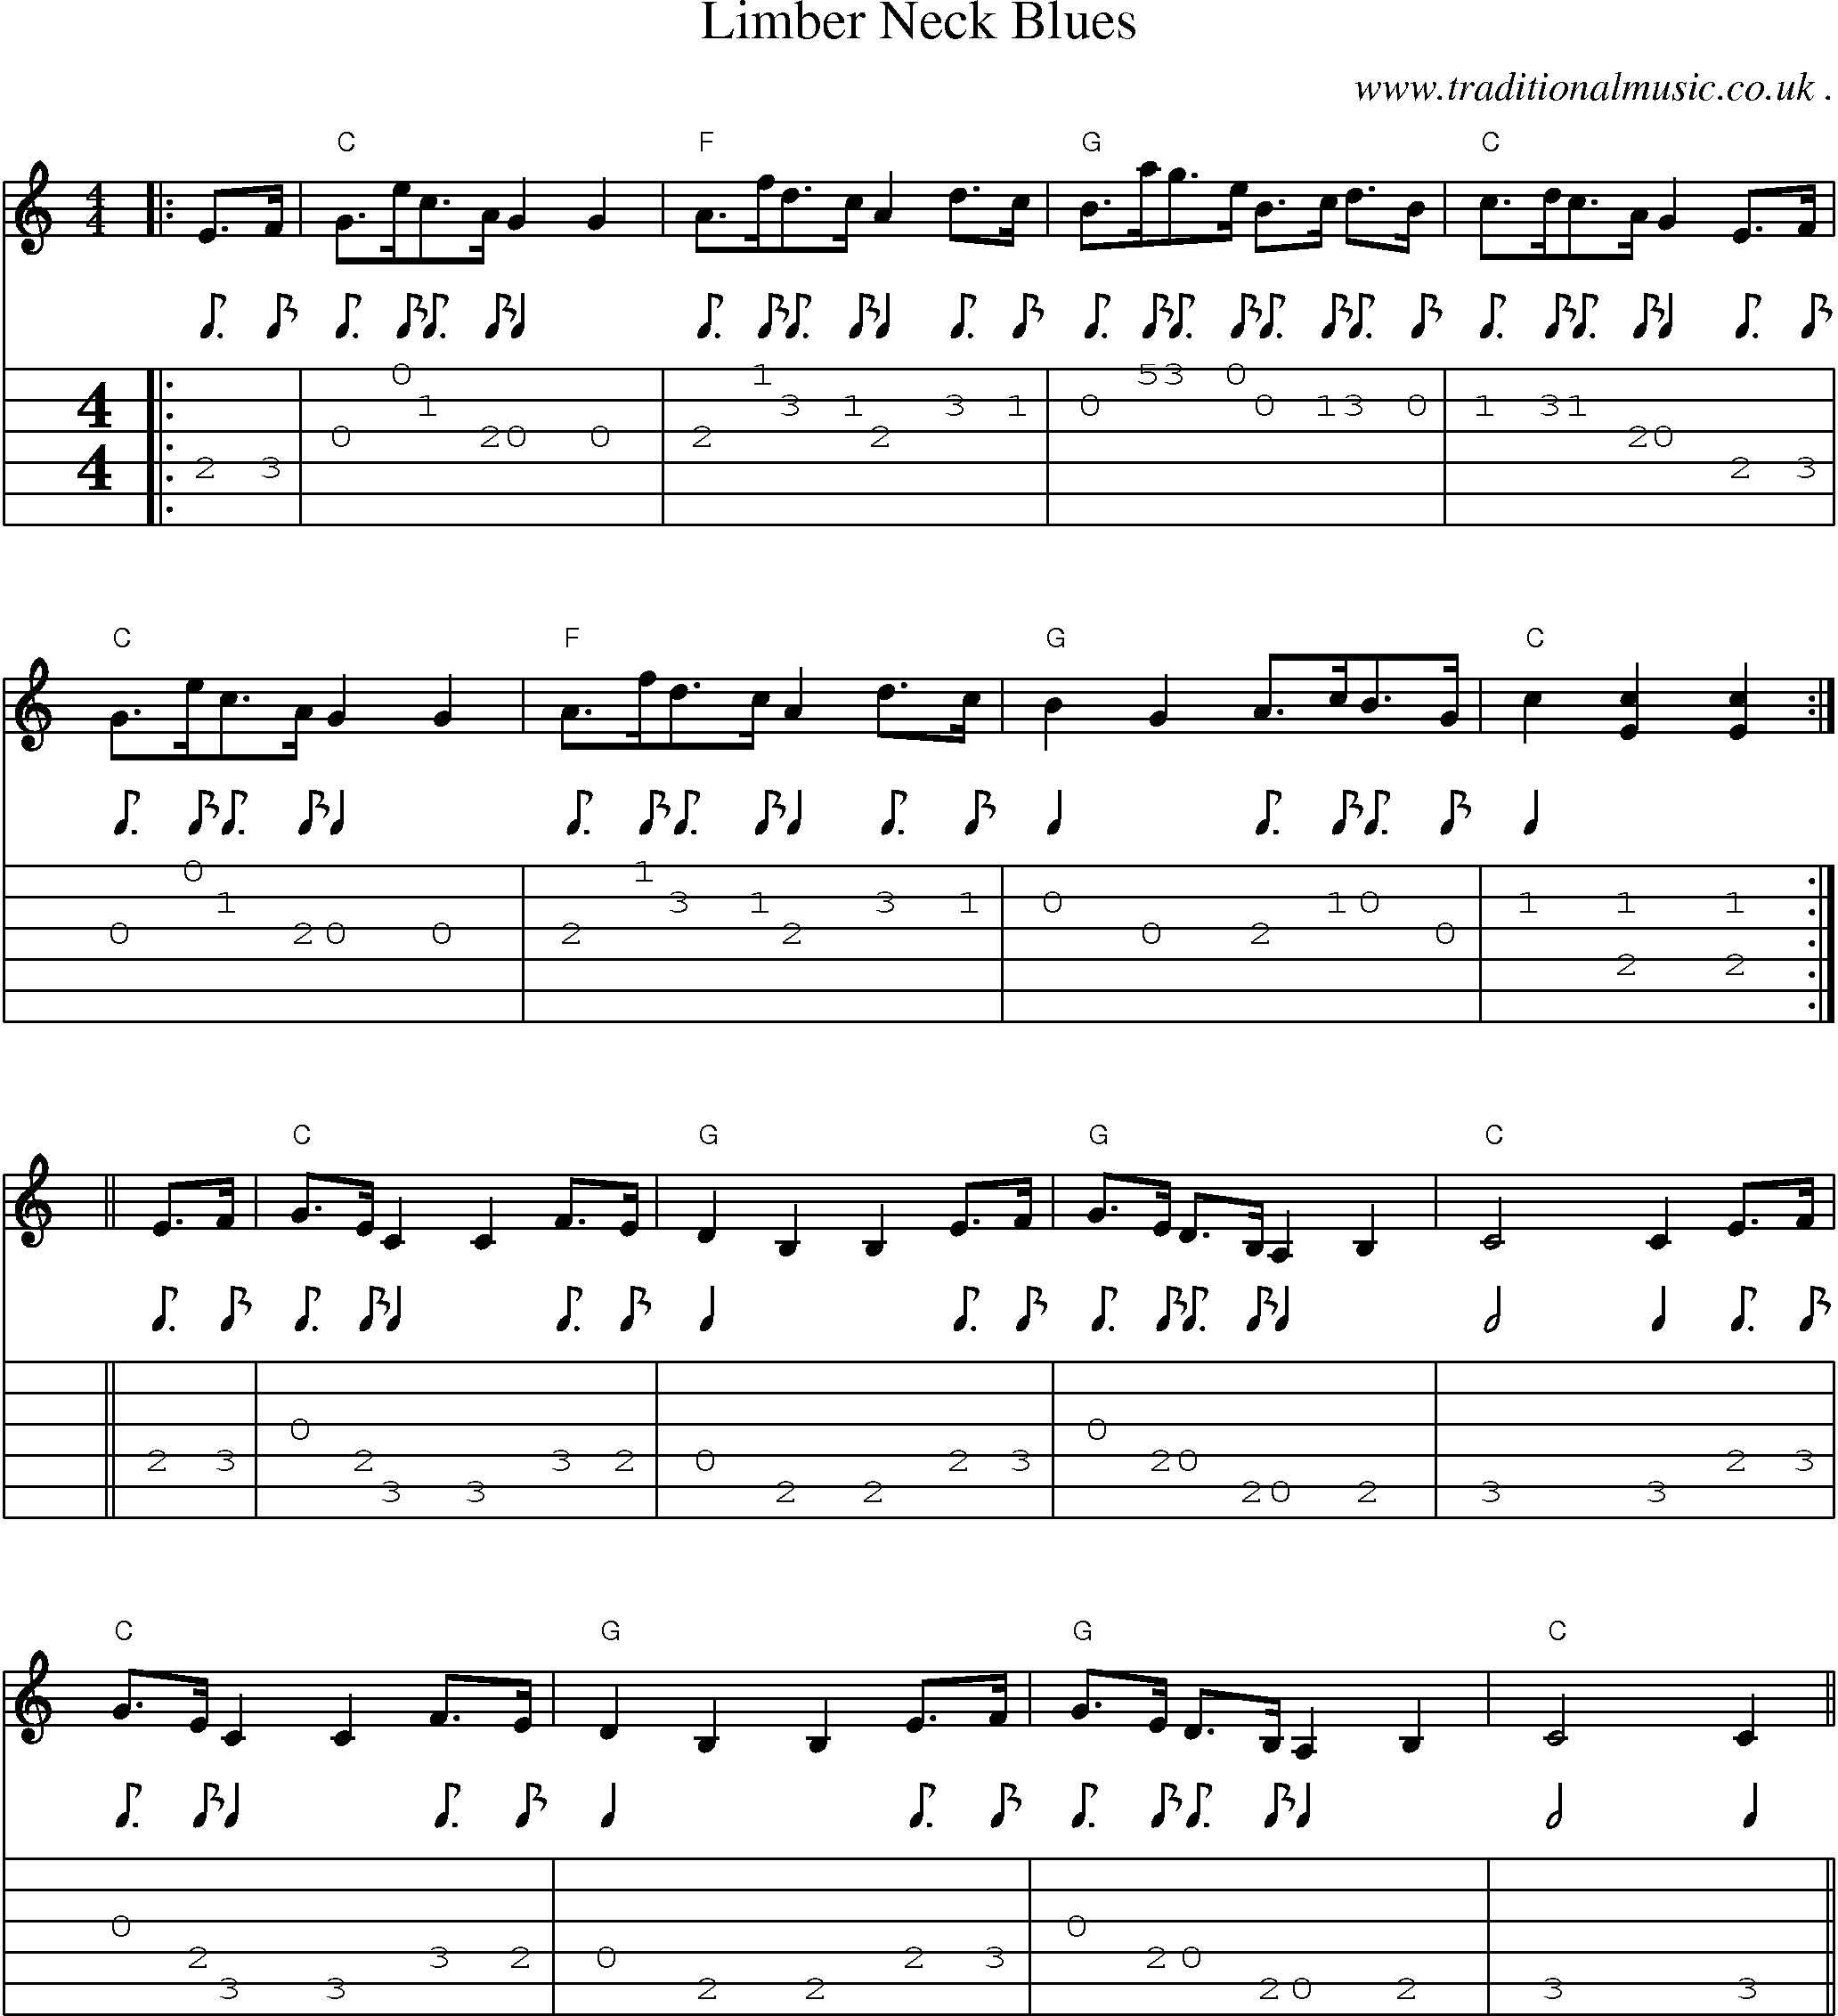 Music Score and Guitar Tabs for Limber Neck Blues